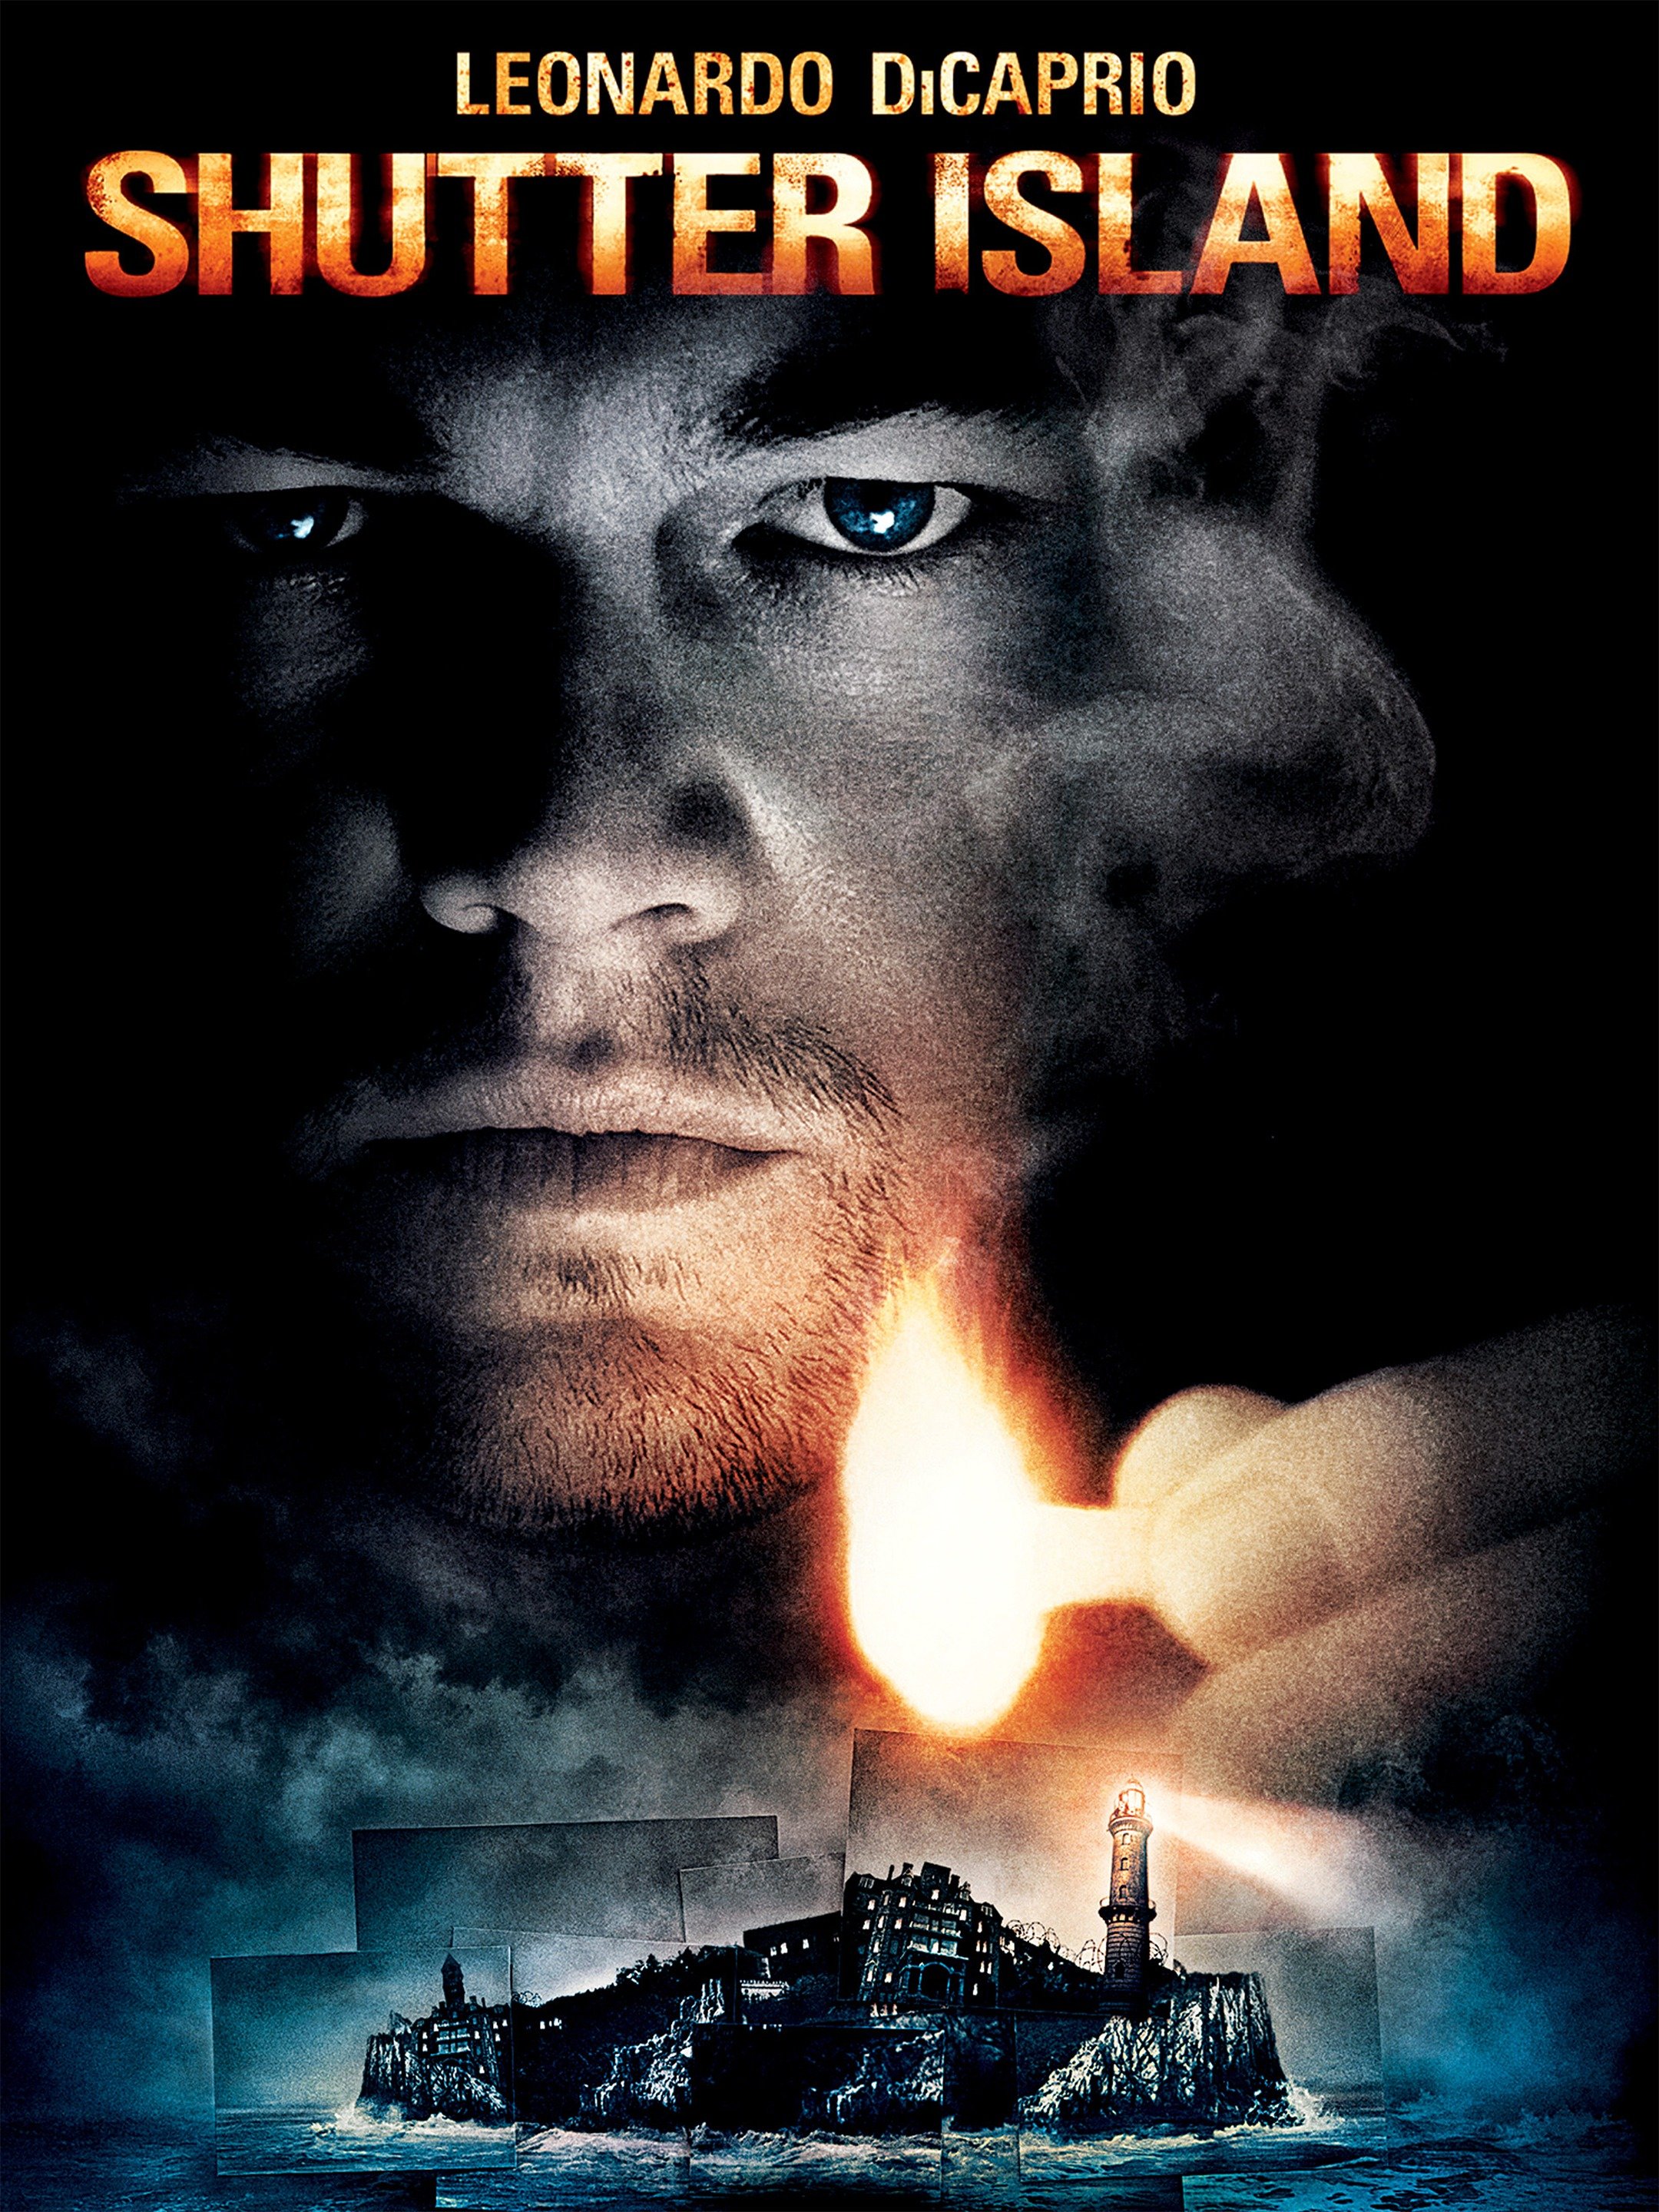 Shutter Island Trailer 1 Trailers And Videos Rotten Tomatoes